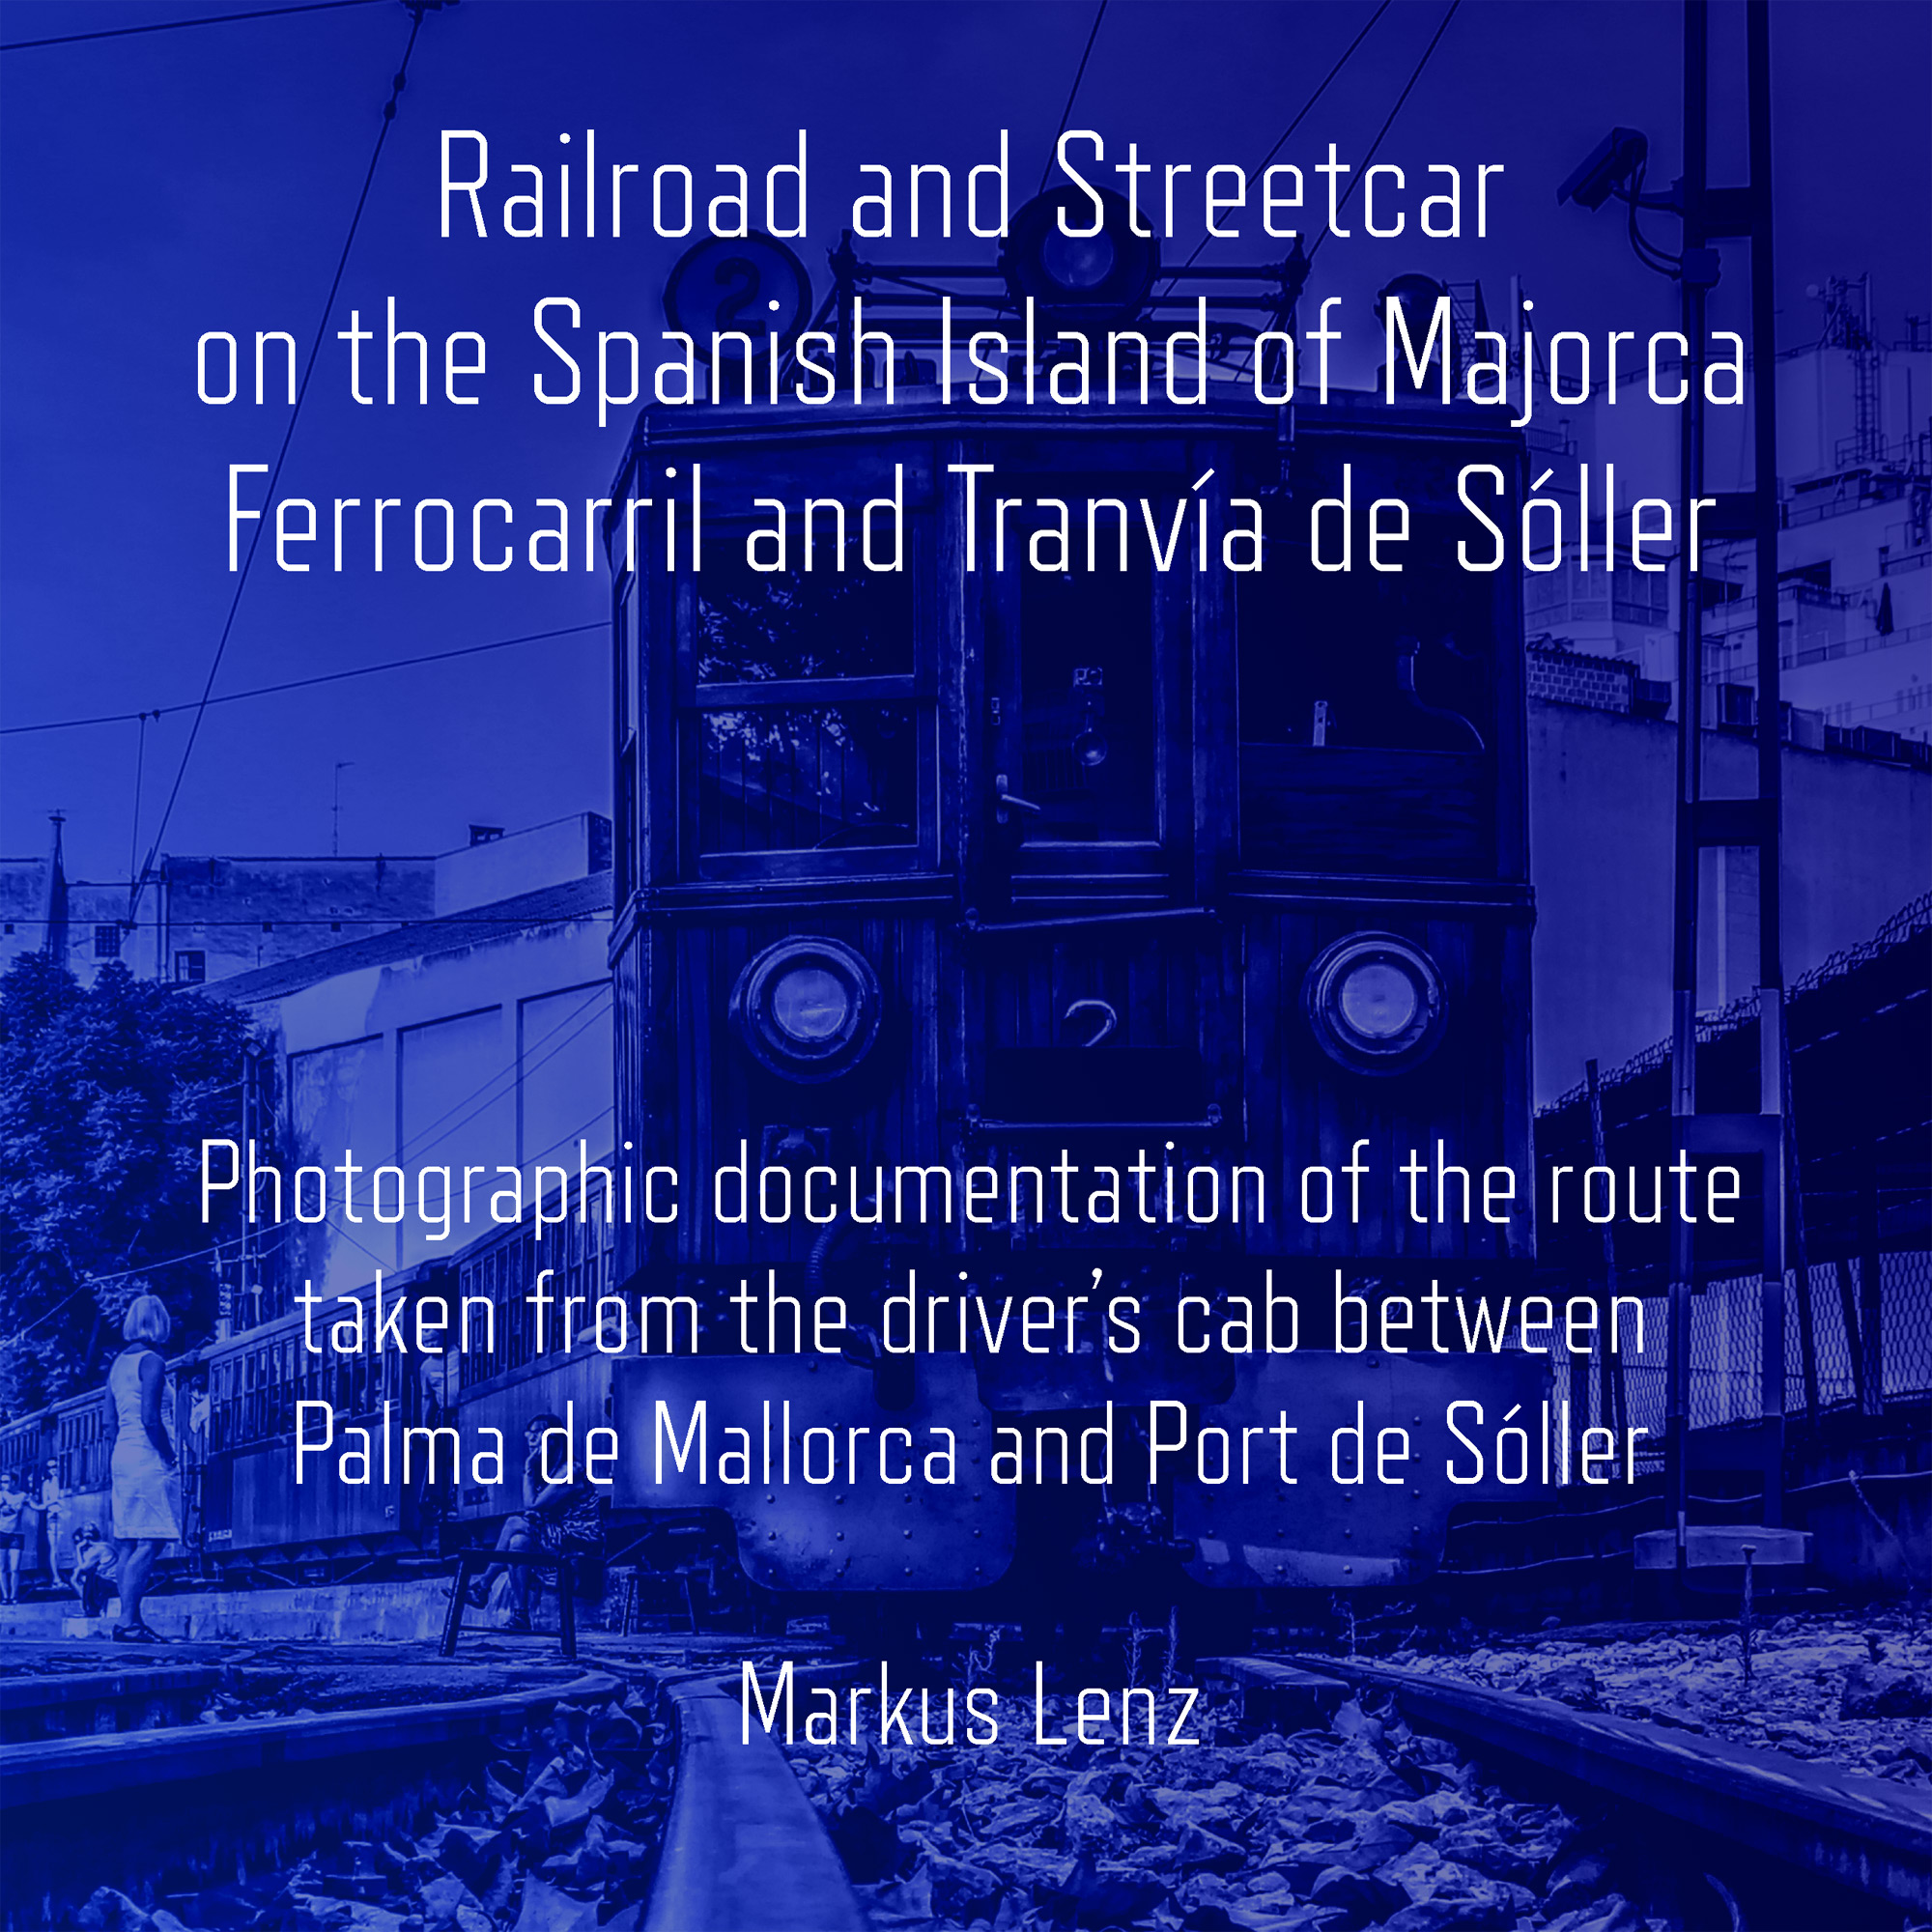 Railroad and Streetcar on the Spanish Island of Majorca: Ferrocarril and Tranvía de Sóller: Photographic documentation of the route taken from the driver's cab between Palma de Mallorca and Port de Sóller